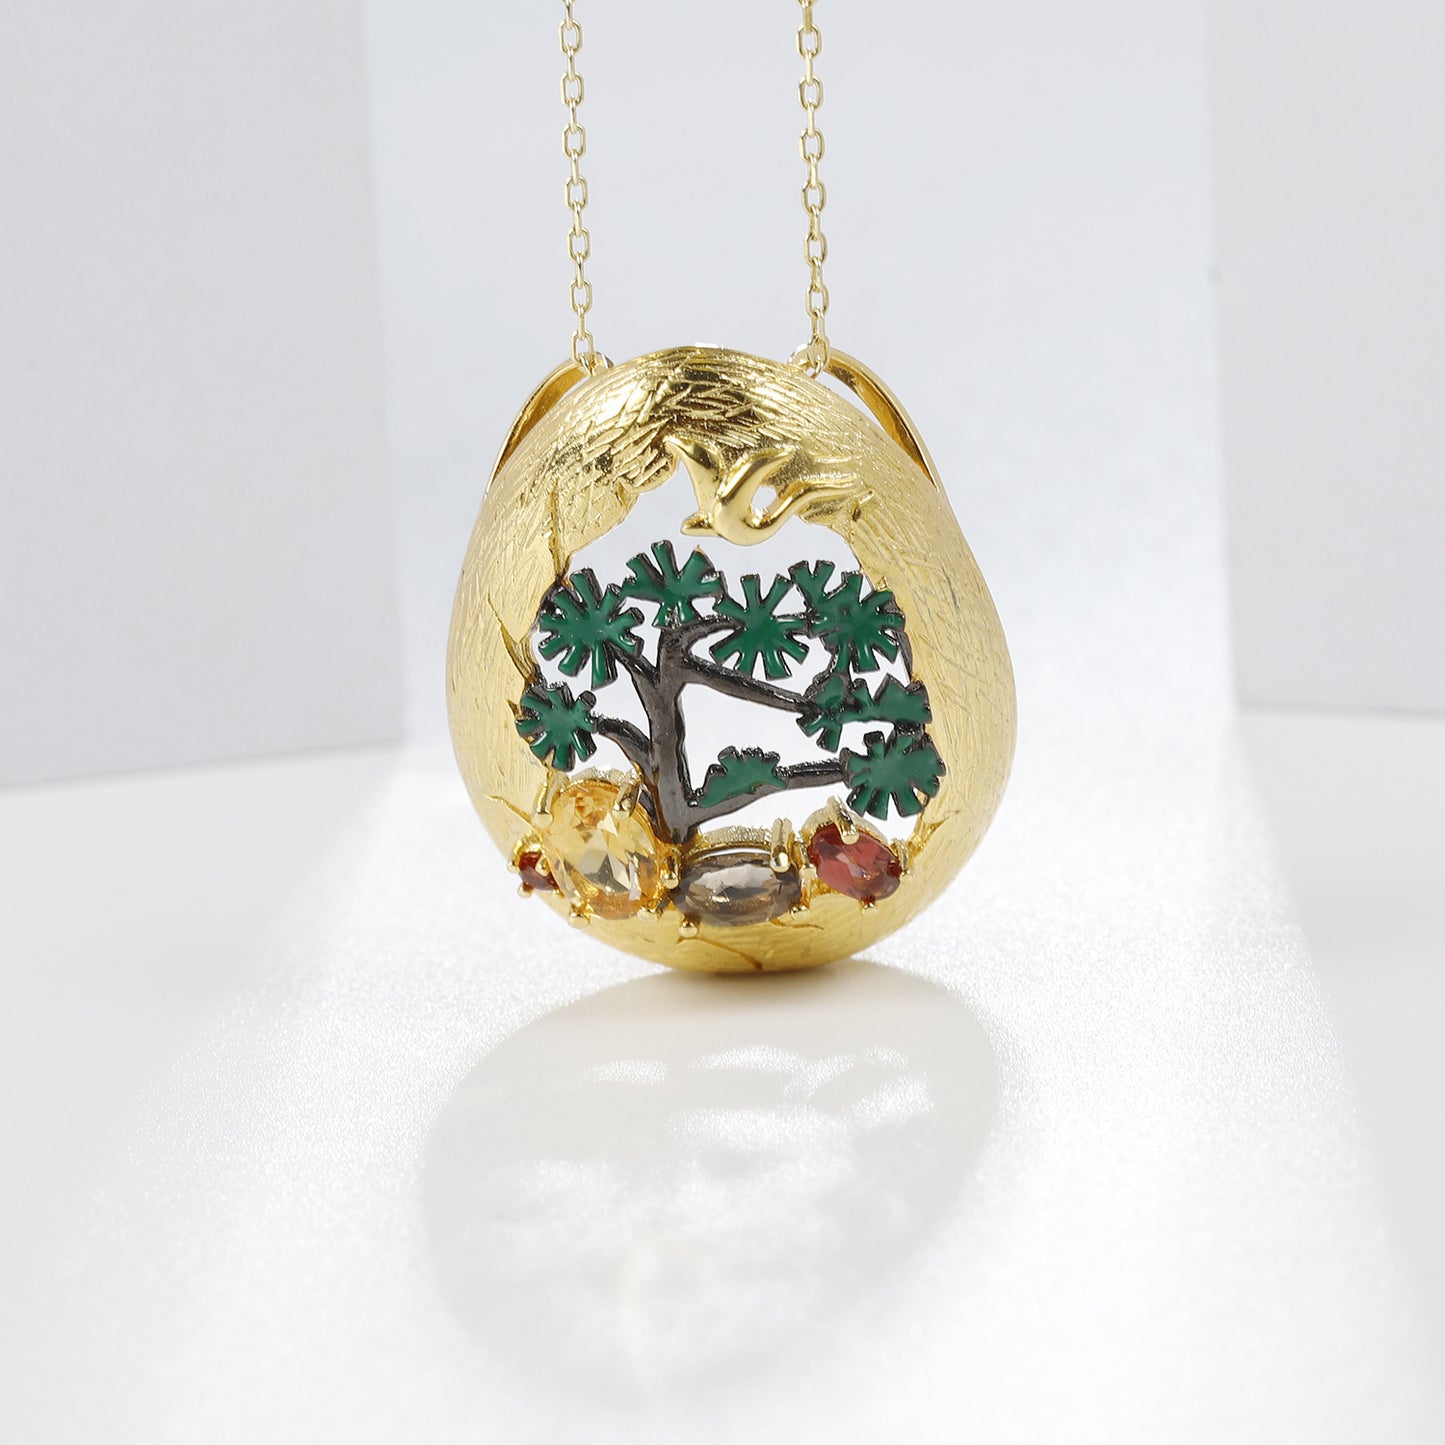 High-level Personality Natural Design Colorful Gemstone Egg Shape with Tree Pendant Silver Necklace for Women